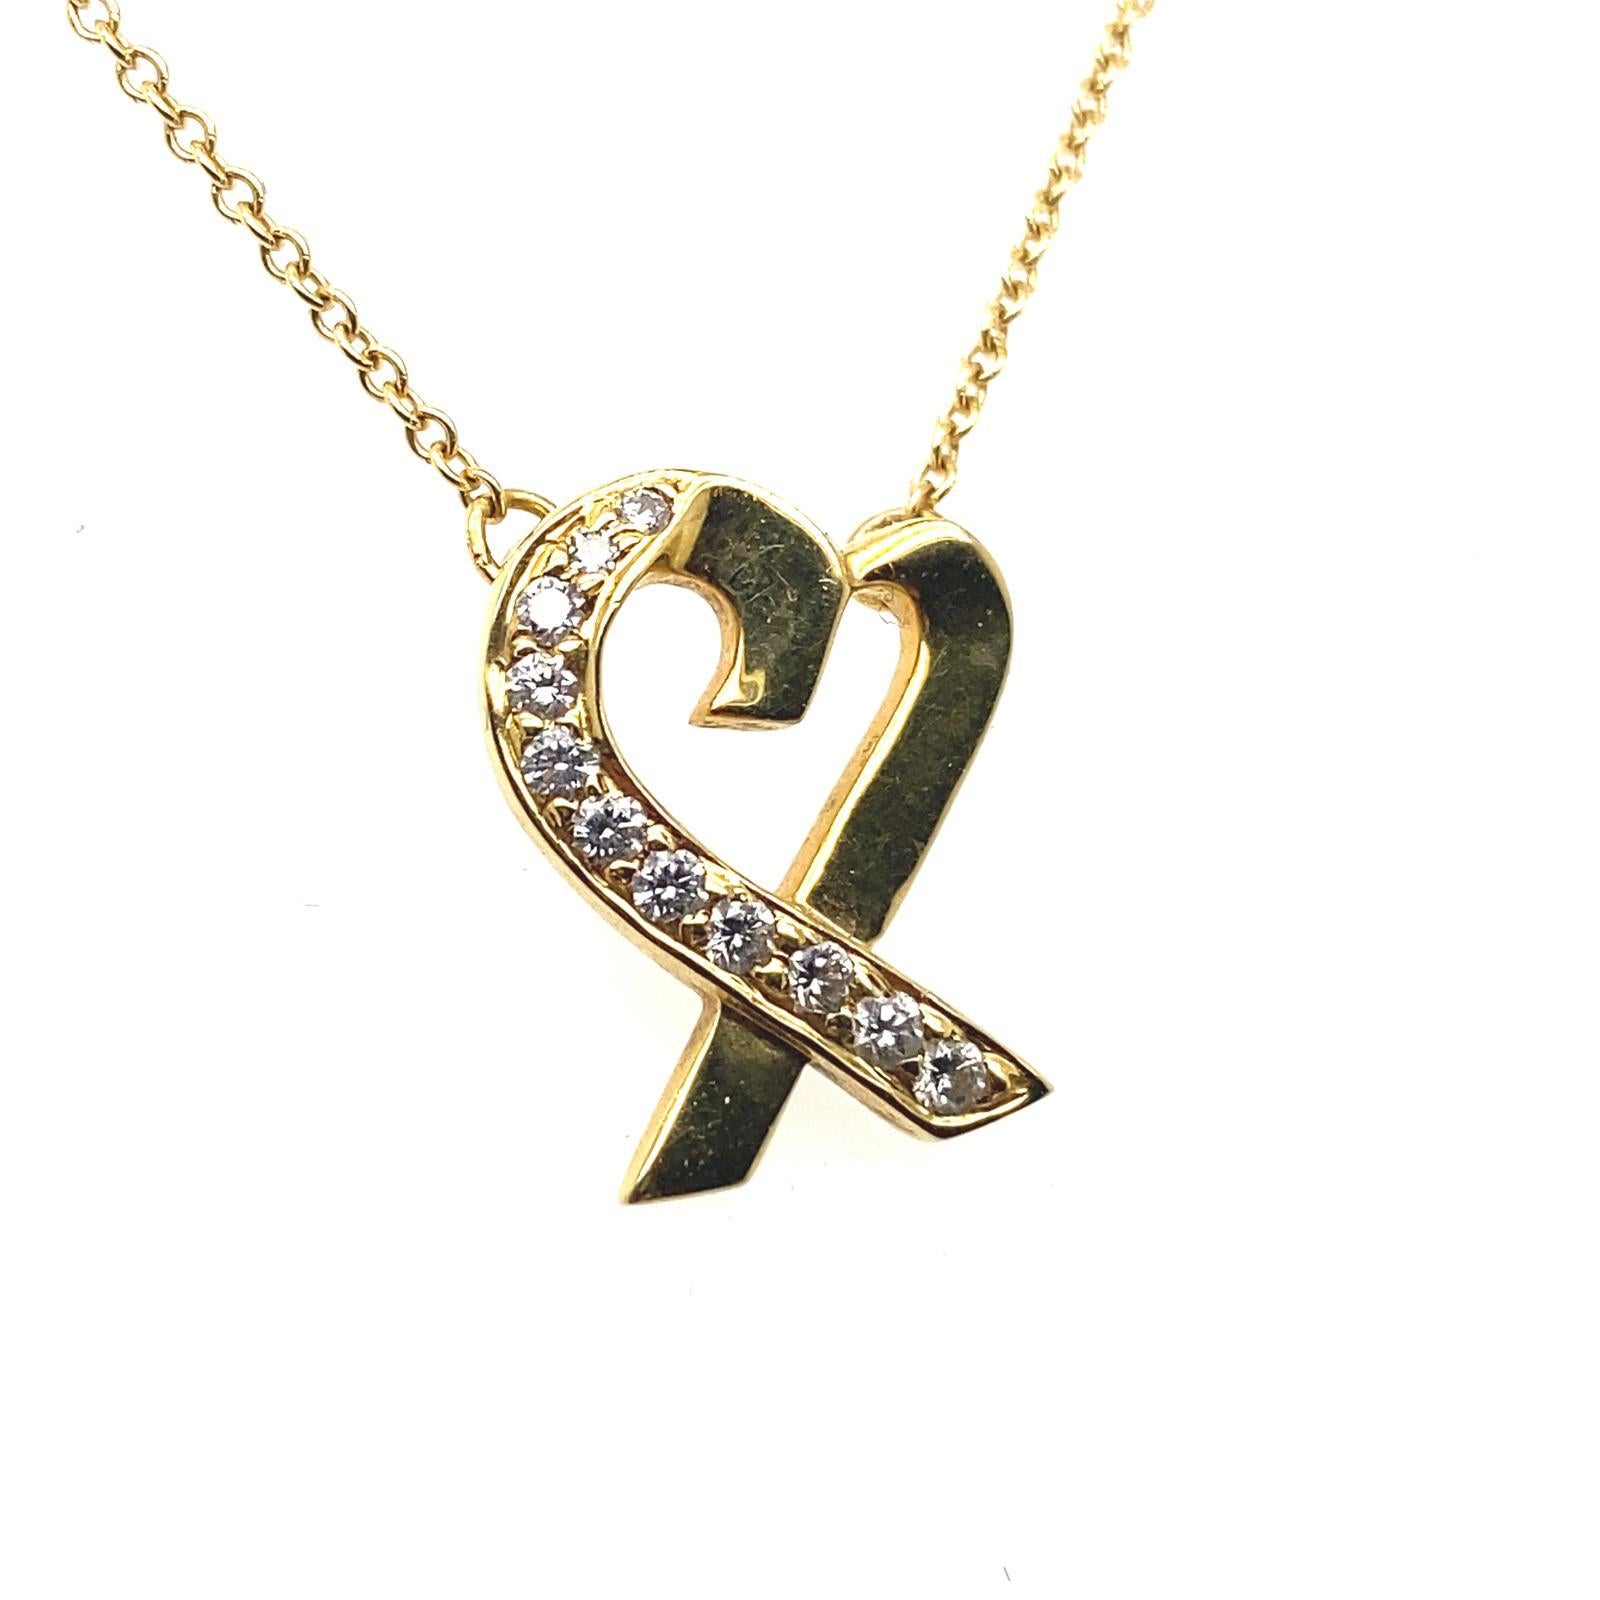 A vintage Paloma Picasso for Tiffany & Co. diamond heart pendant and chain in 18 karat yellow gold.

This 18 karat yellow gold open heart pendant is one of Paloma Picasso's iconic designs for Tiffany & Co, set to one side of the heart with eleven